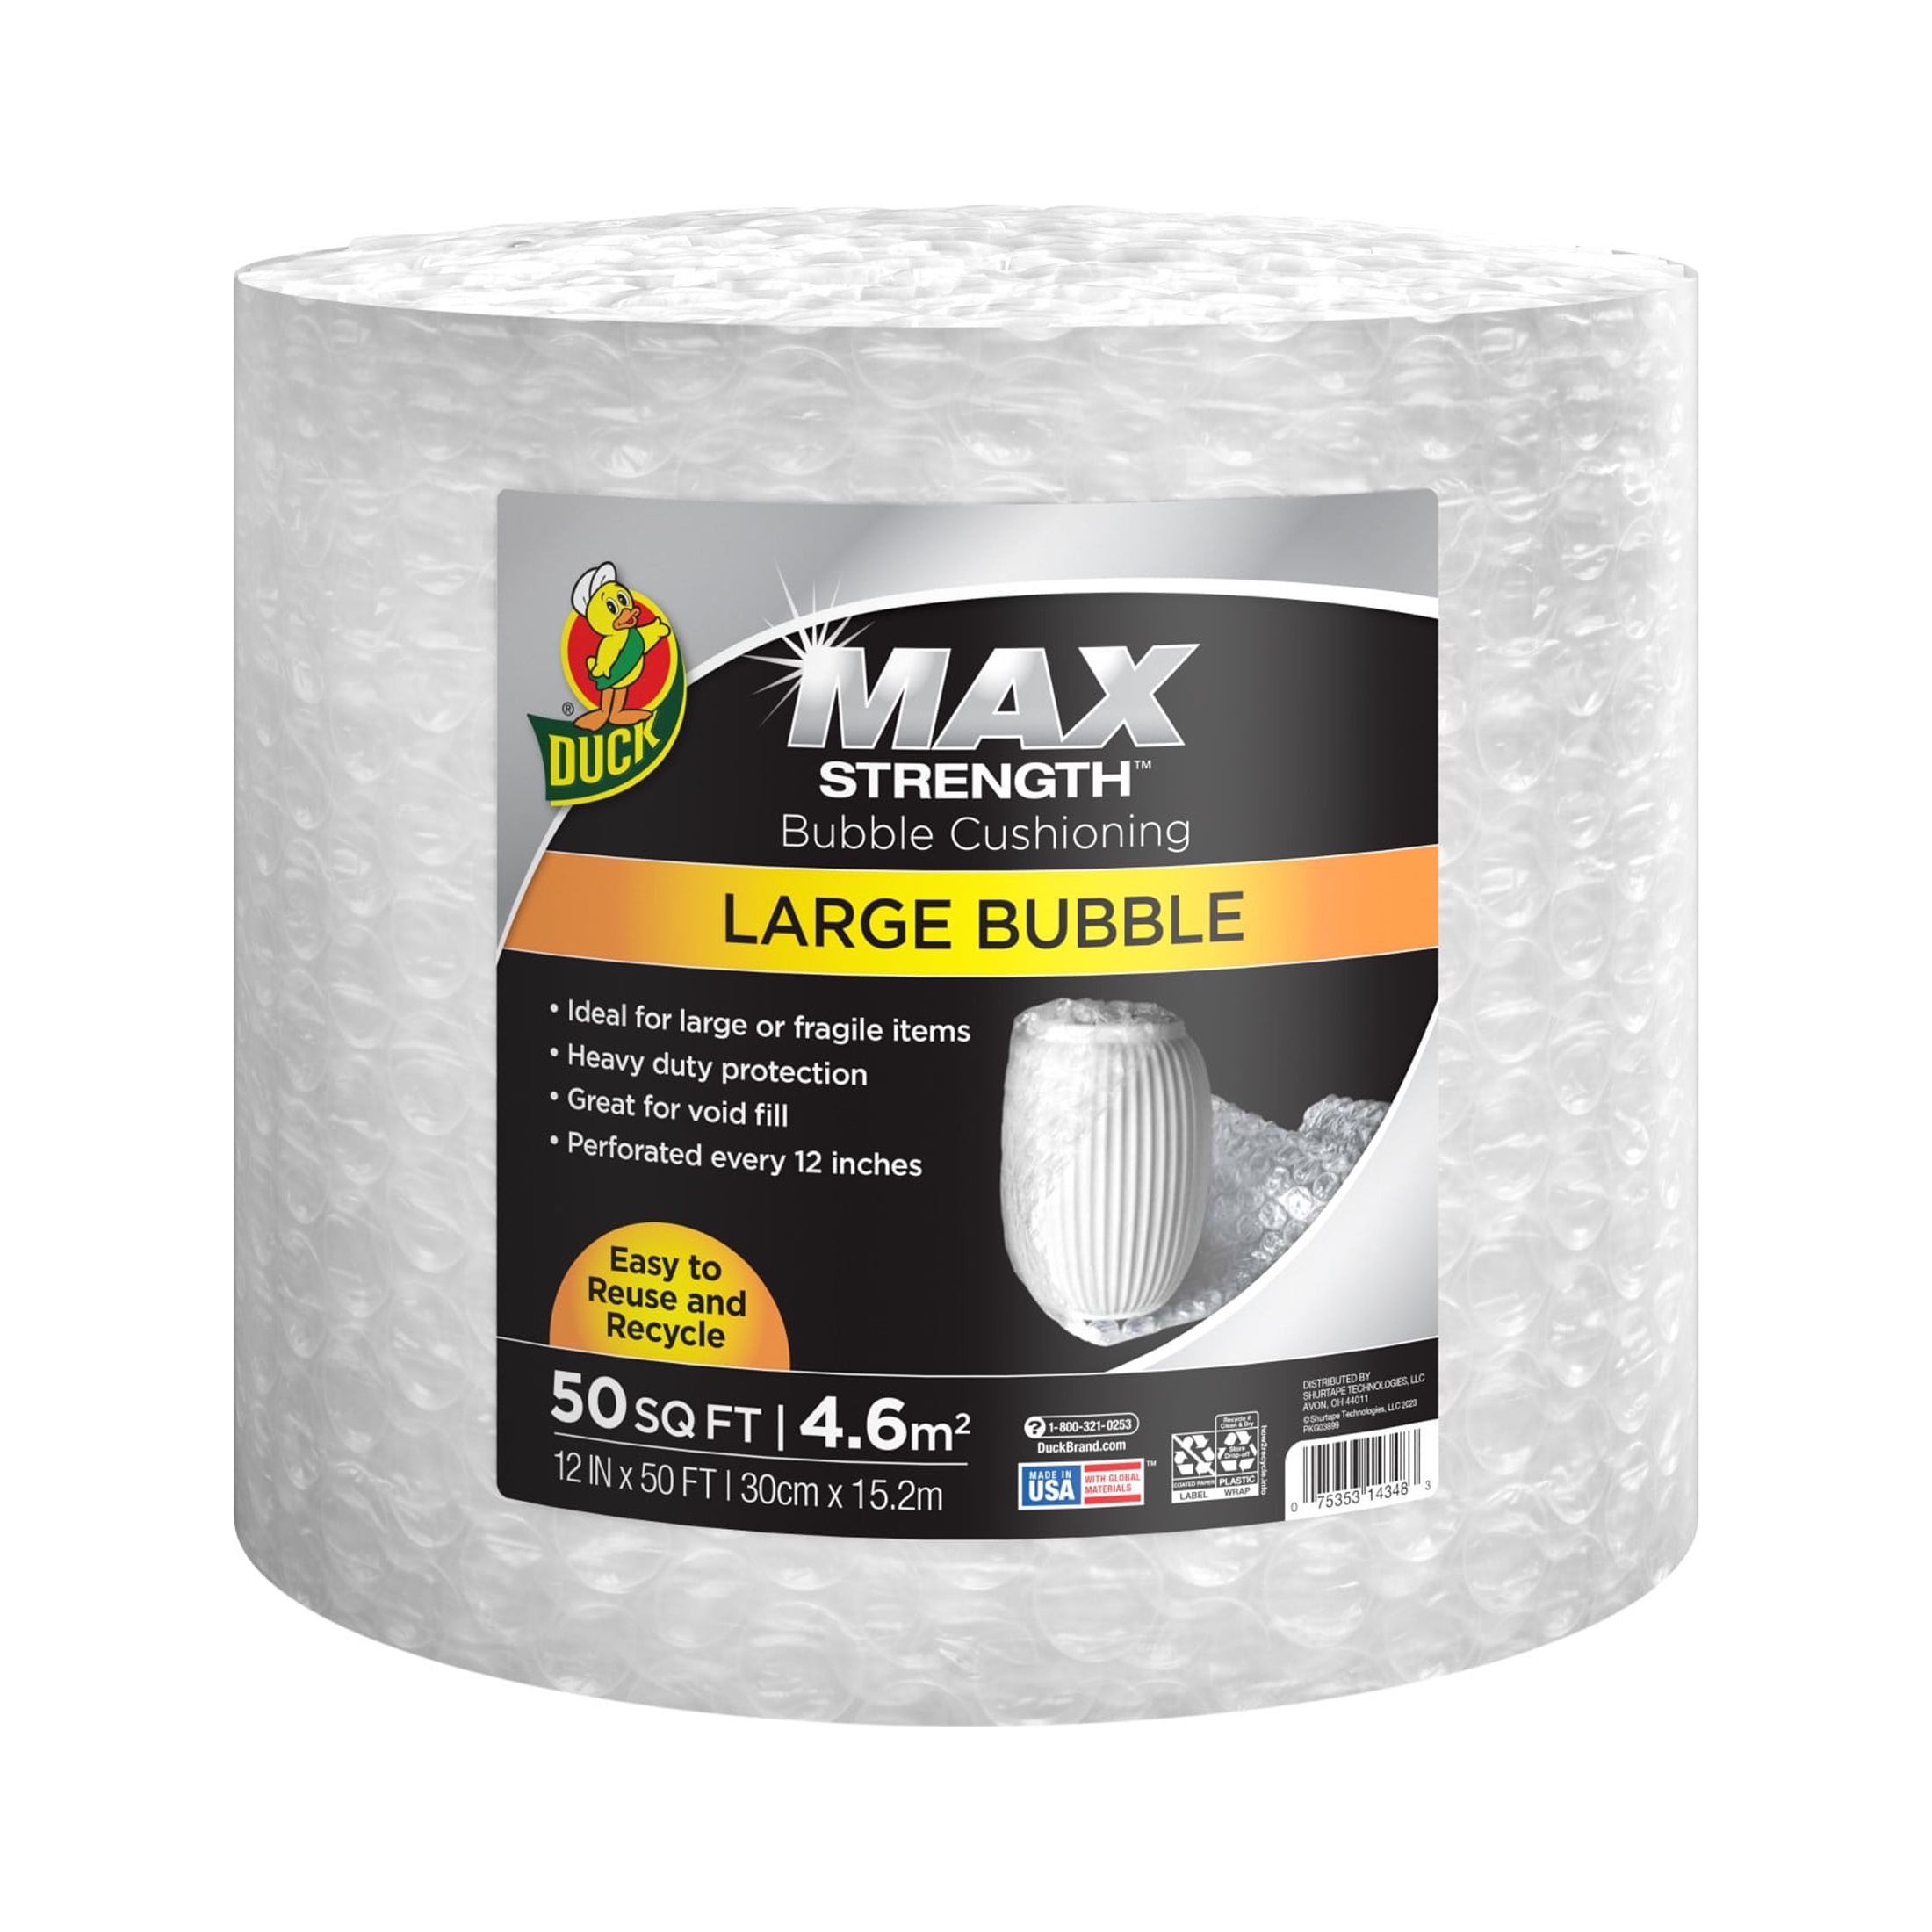 Duck Max Strength Large Bubble Cushioning Wrap, 12 in x 50 ft, Clear, (287222) - image 1 of 11